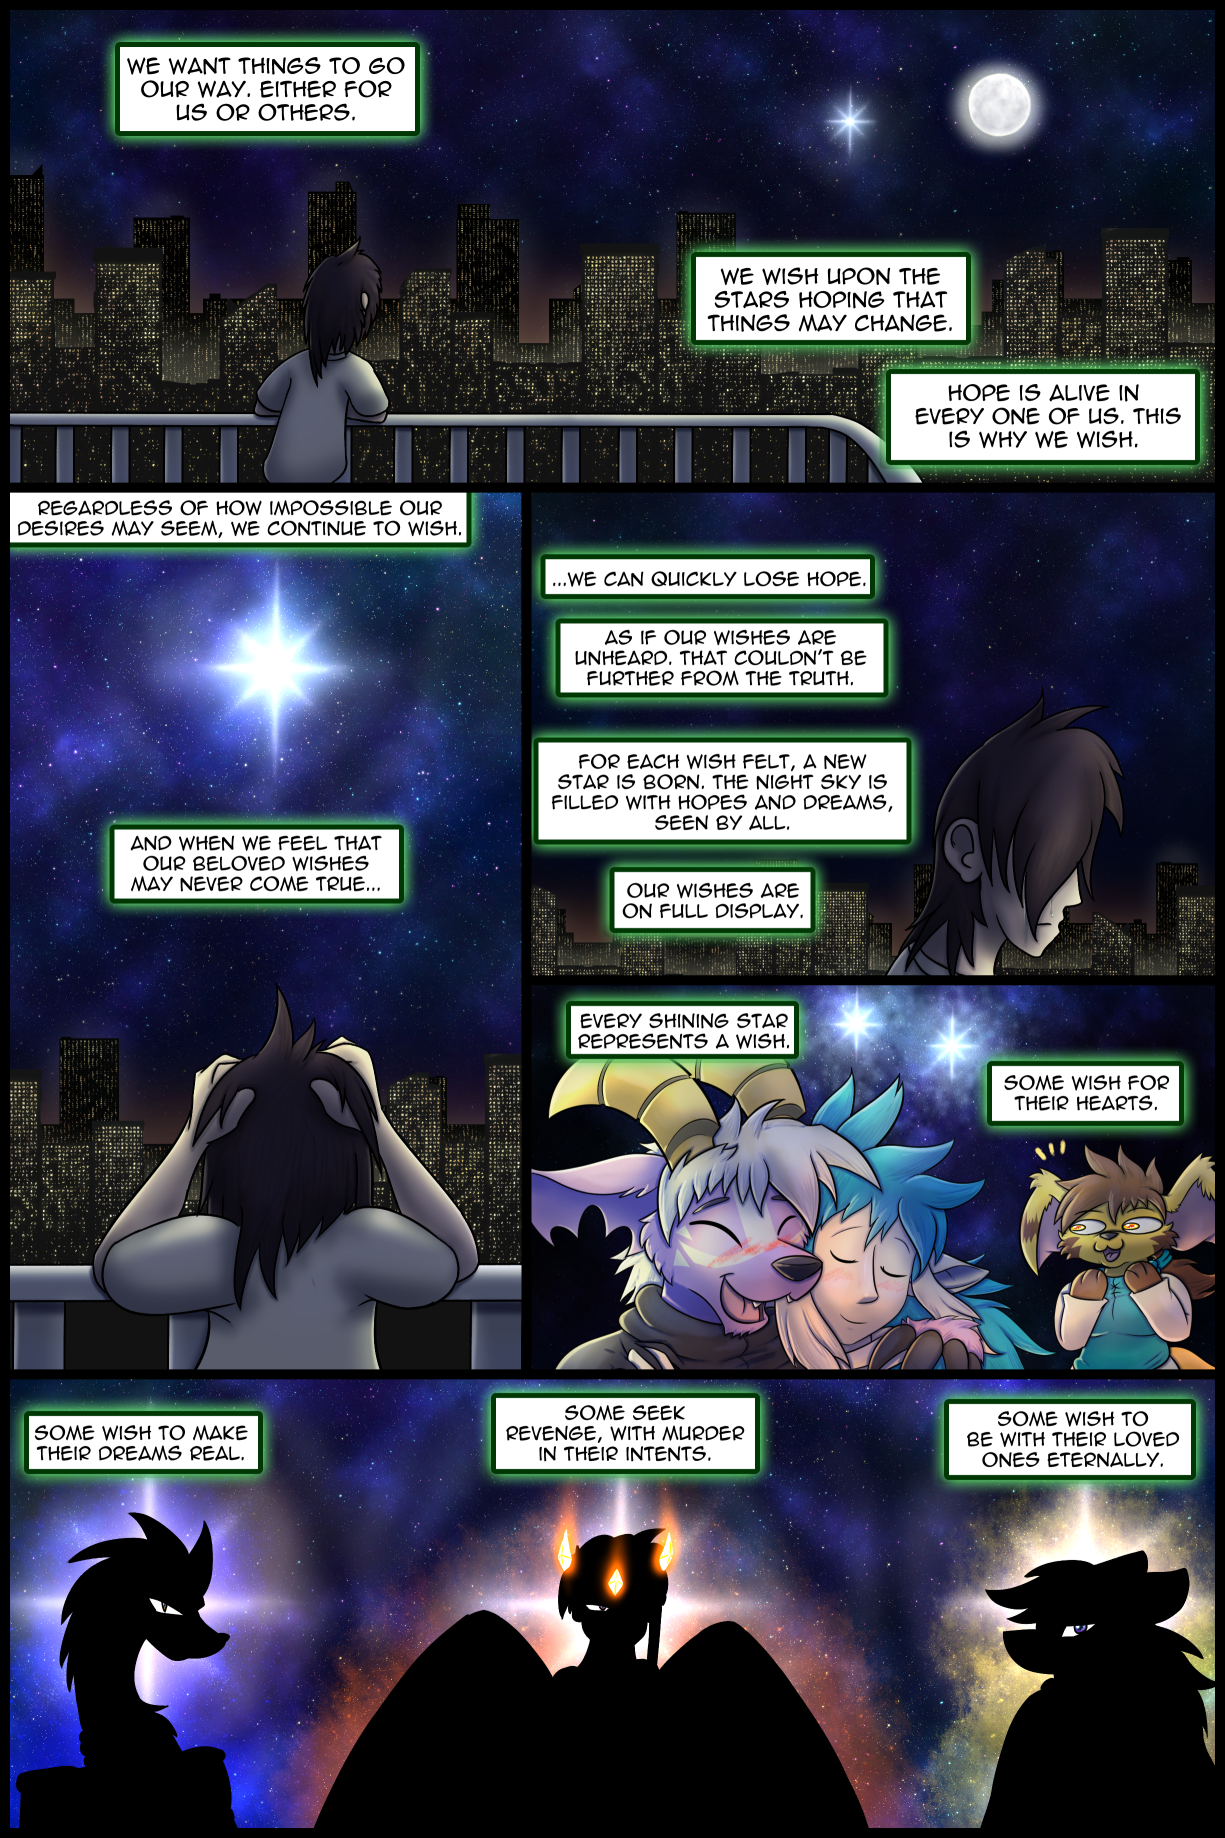 Ch0 Remastered Page 1-2 – Desperately Wishing – All Kinds of Wishes